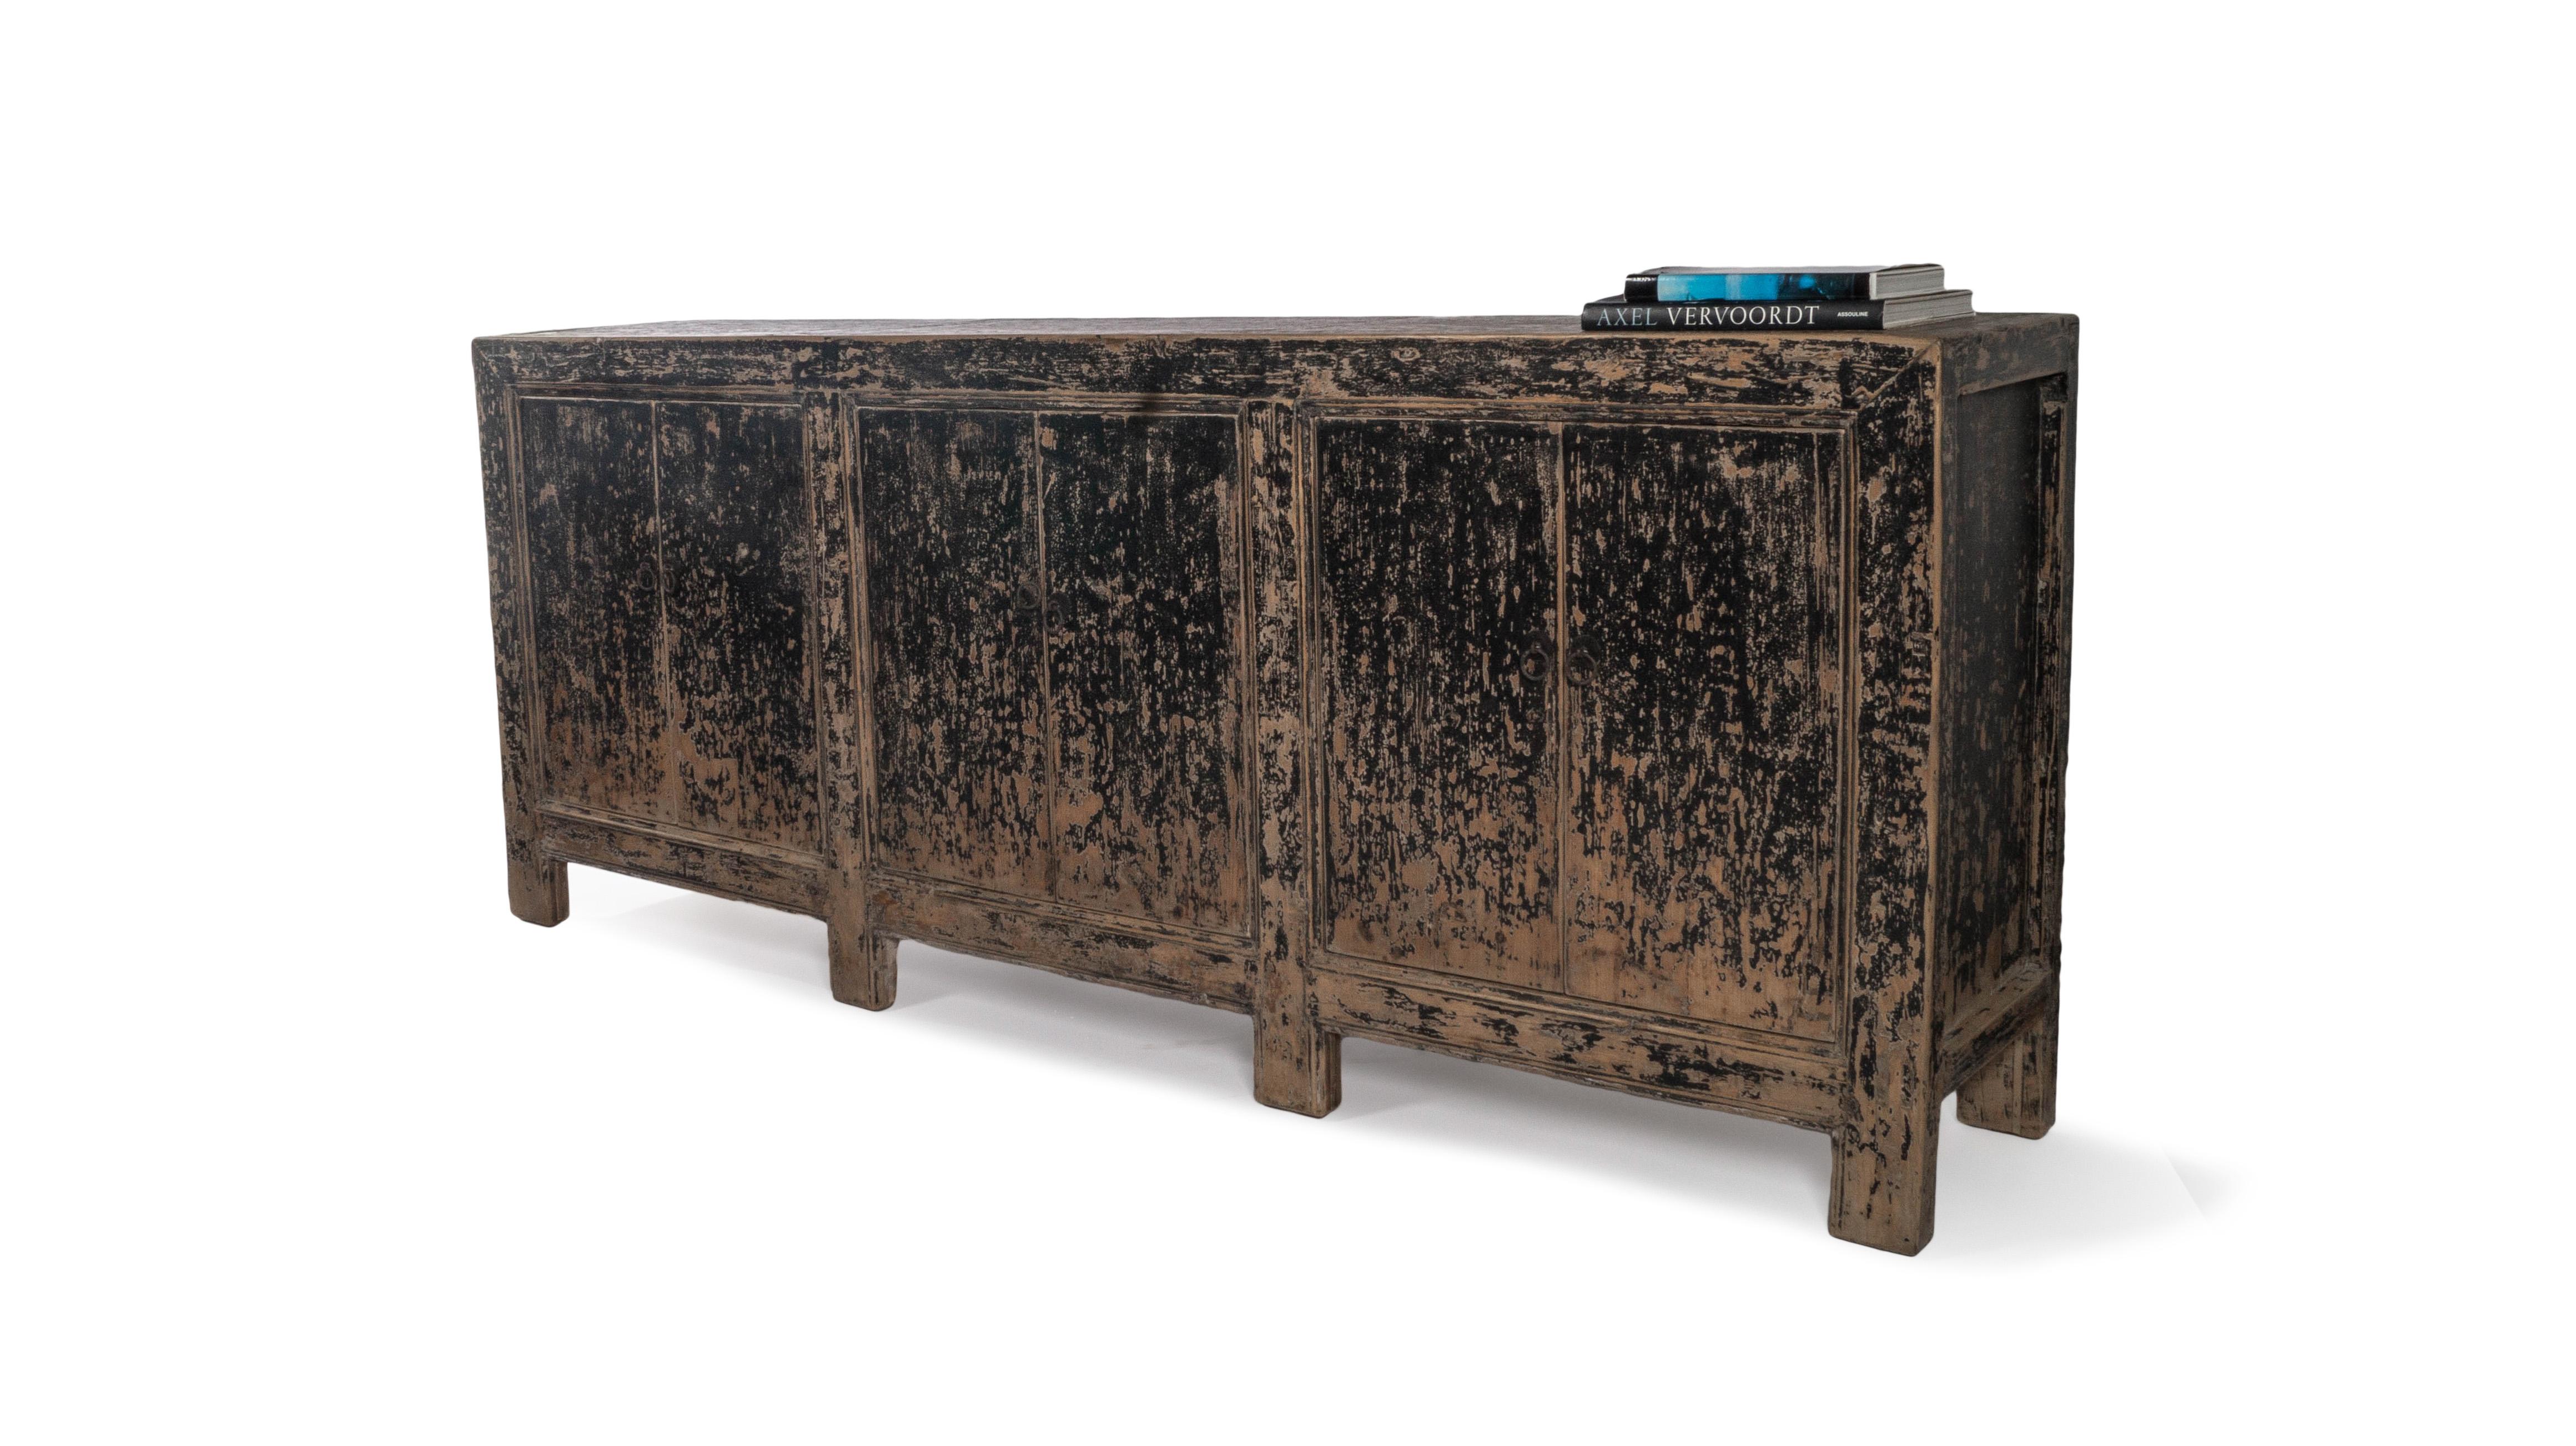 This four door server features a distressed ebony patina and is the perfect storage piece for any room in your home.

This piece is a part of one-of-a-kind collection, Le Monde. French for “The World”, the Le Monde collection is made up of rare